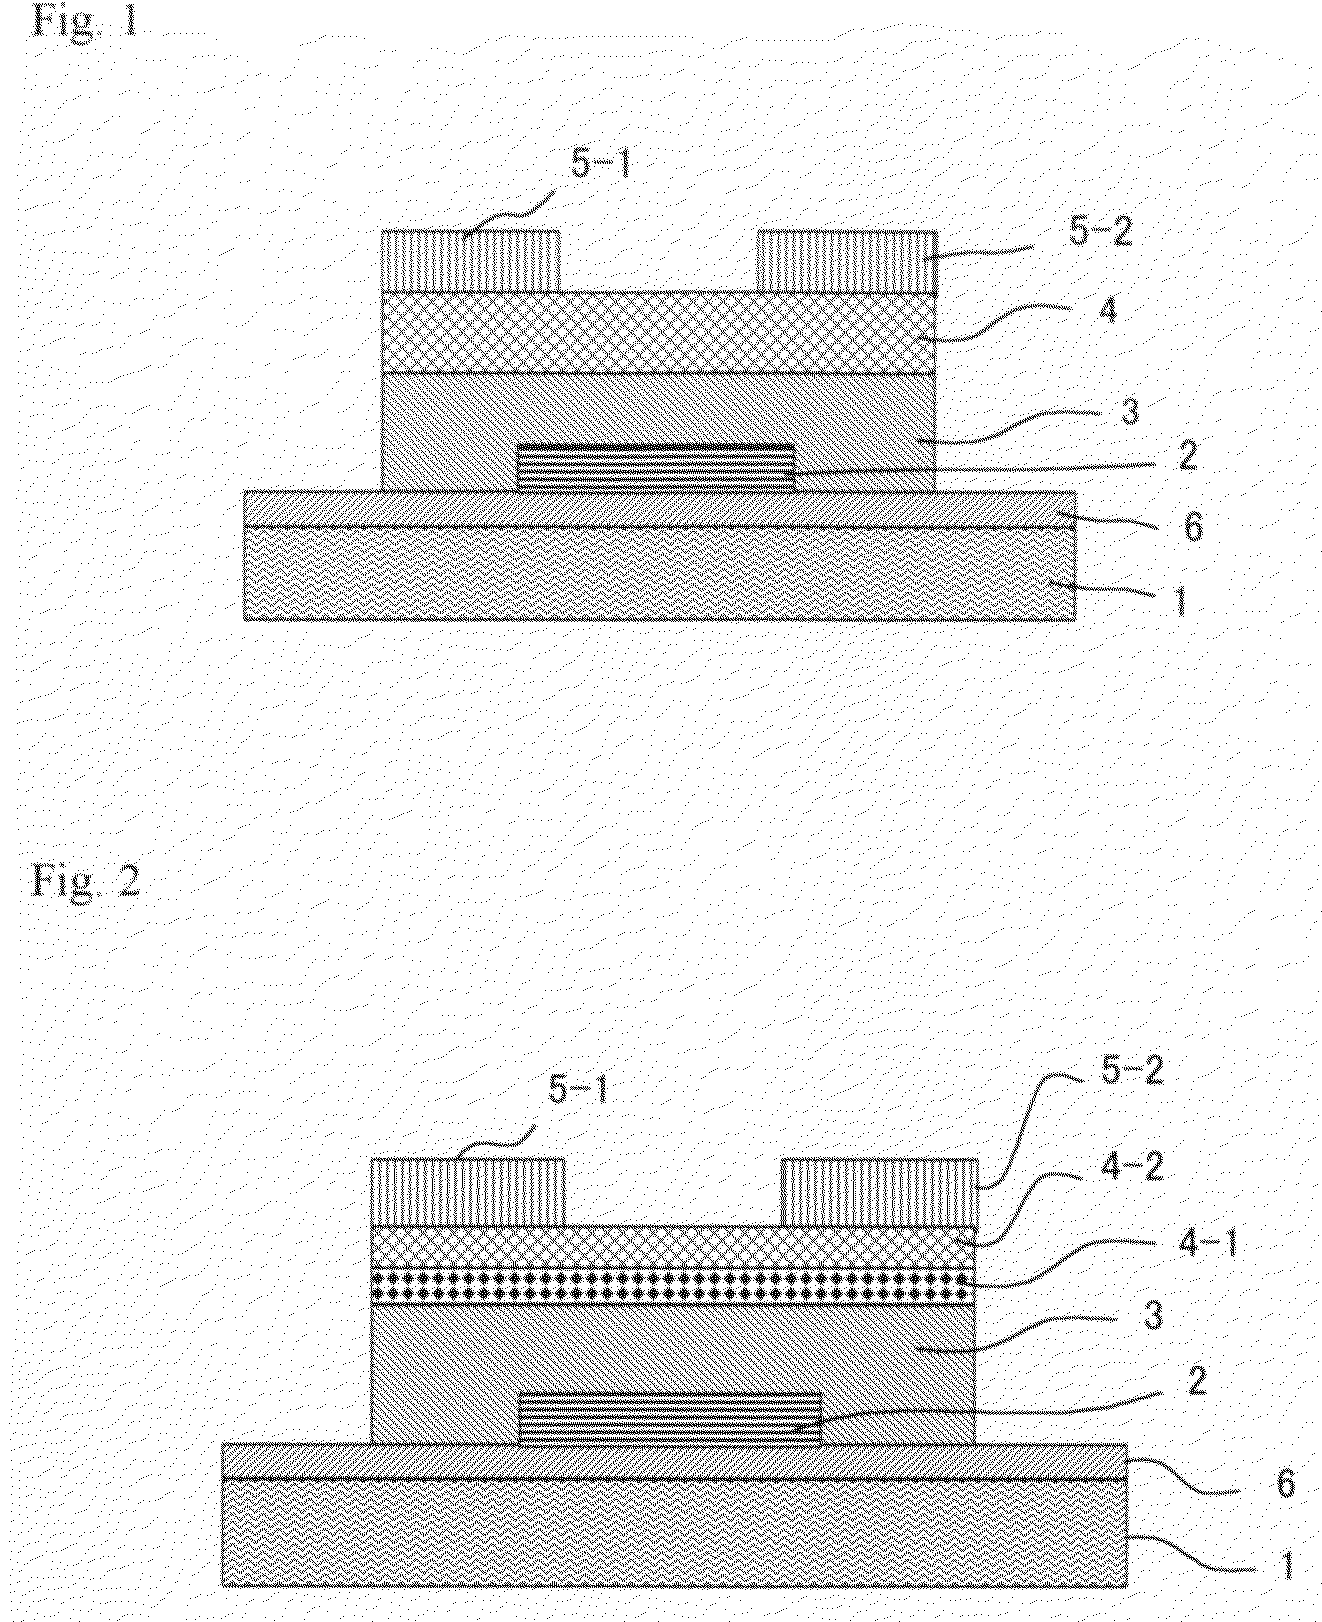 Thin film field effect transistor and electroluminescence display using the same